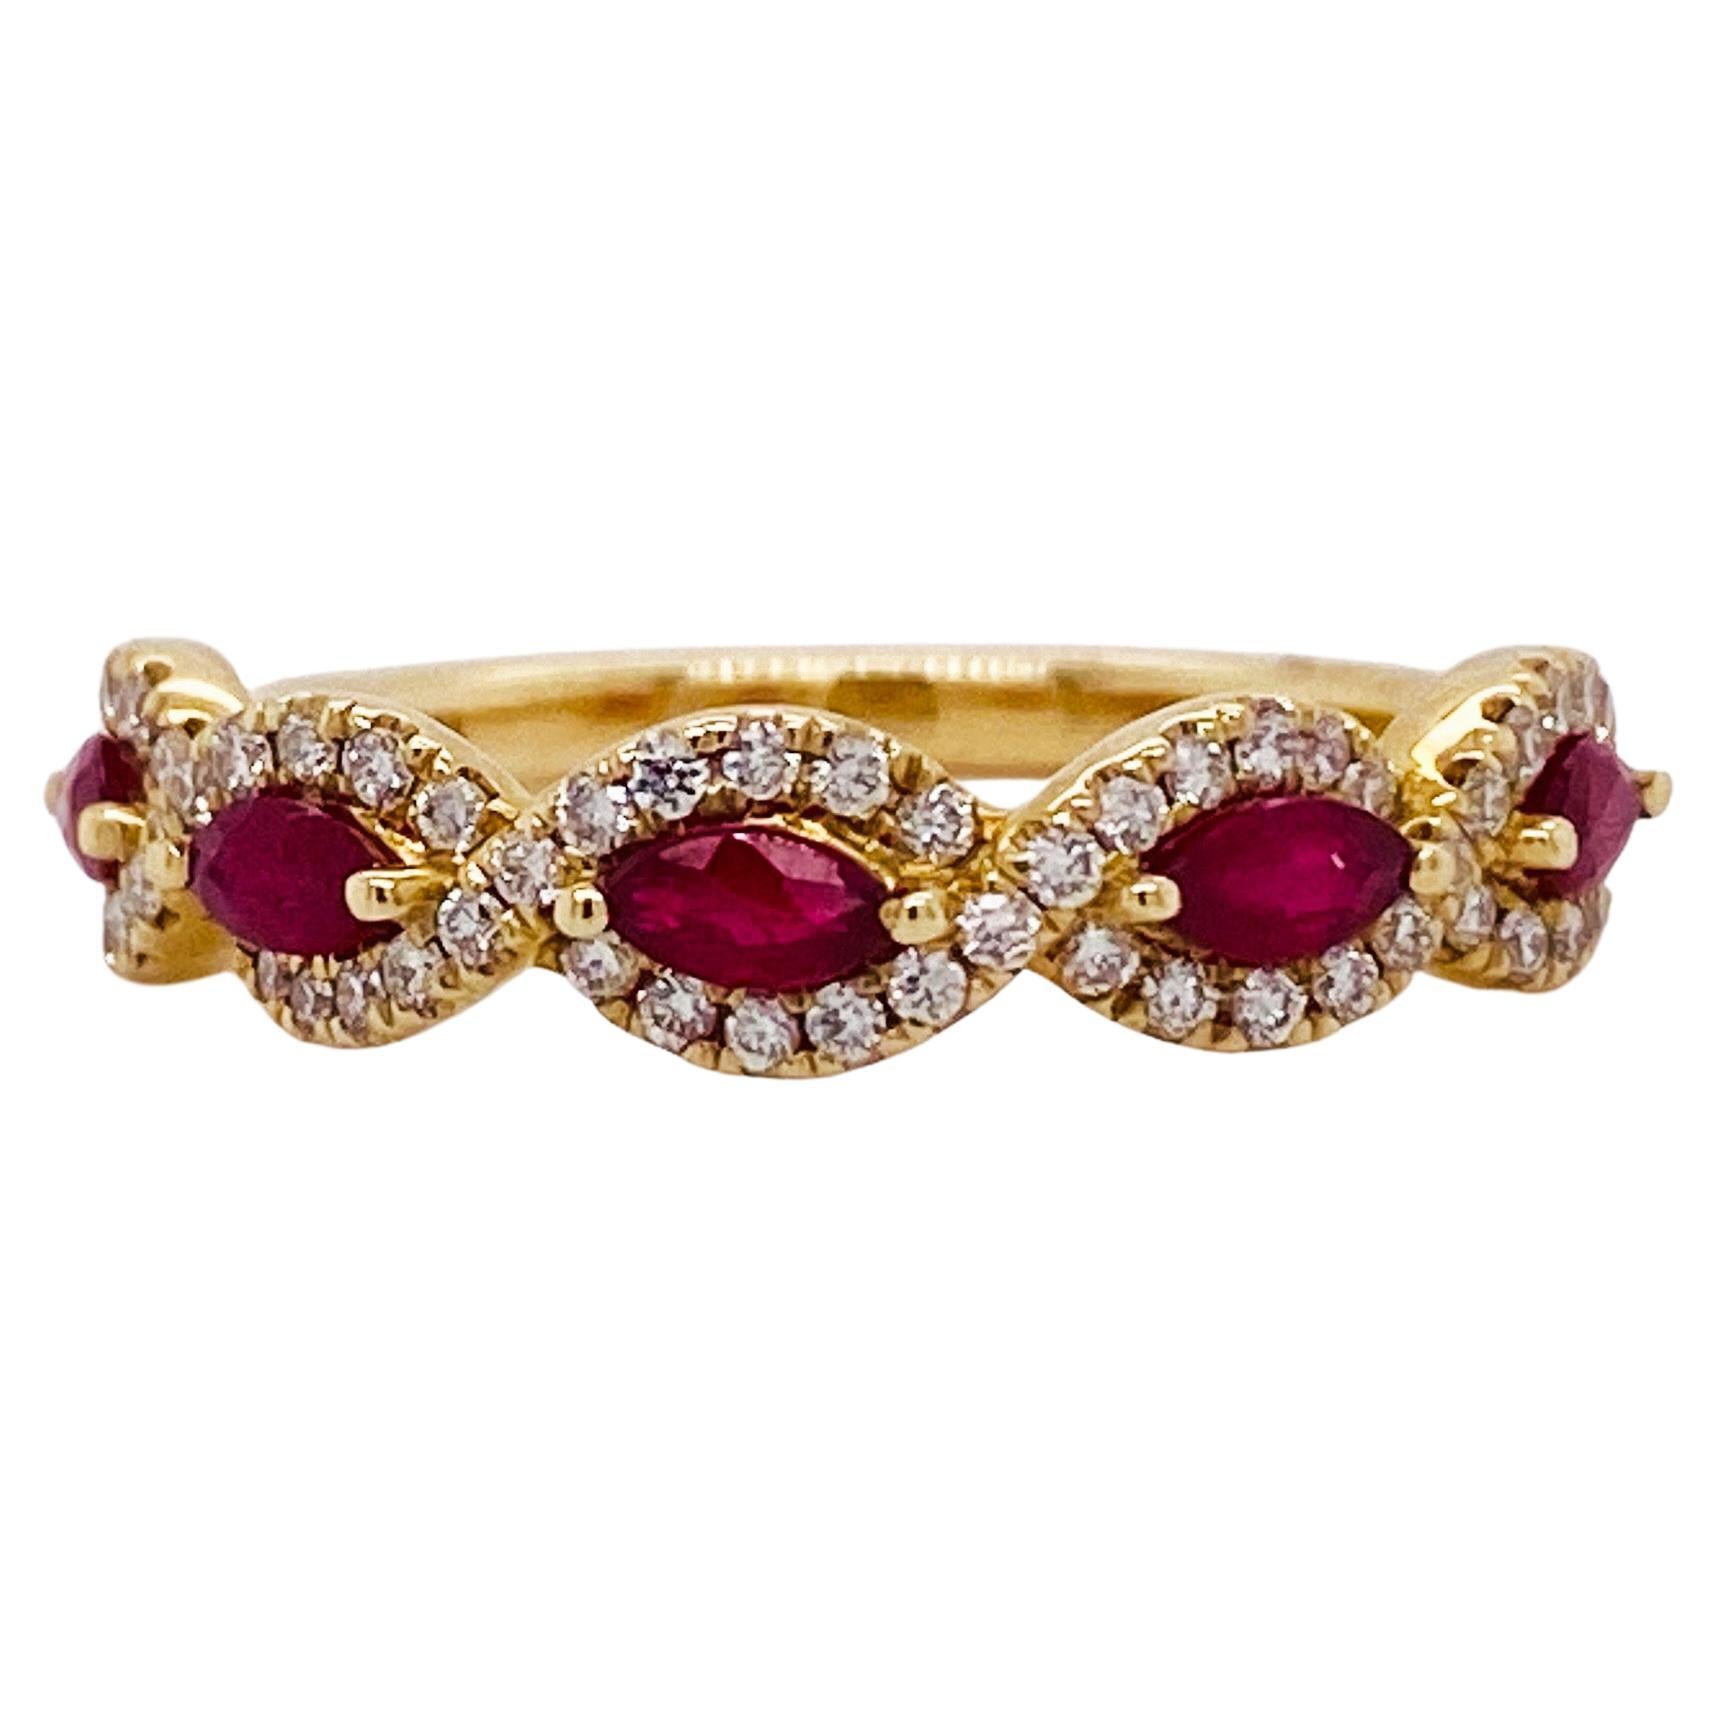 For Sale:  Ruby Marquise Diamond Twist Band in 14K Yellow Gold, 0.76 Carats LR52021 LV